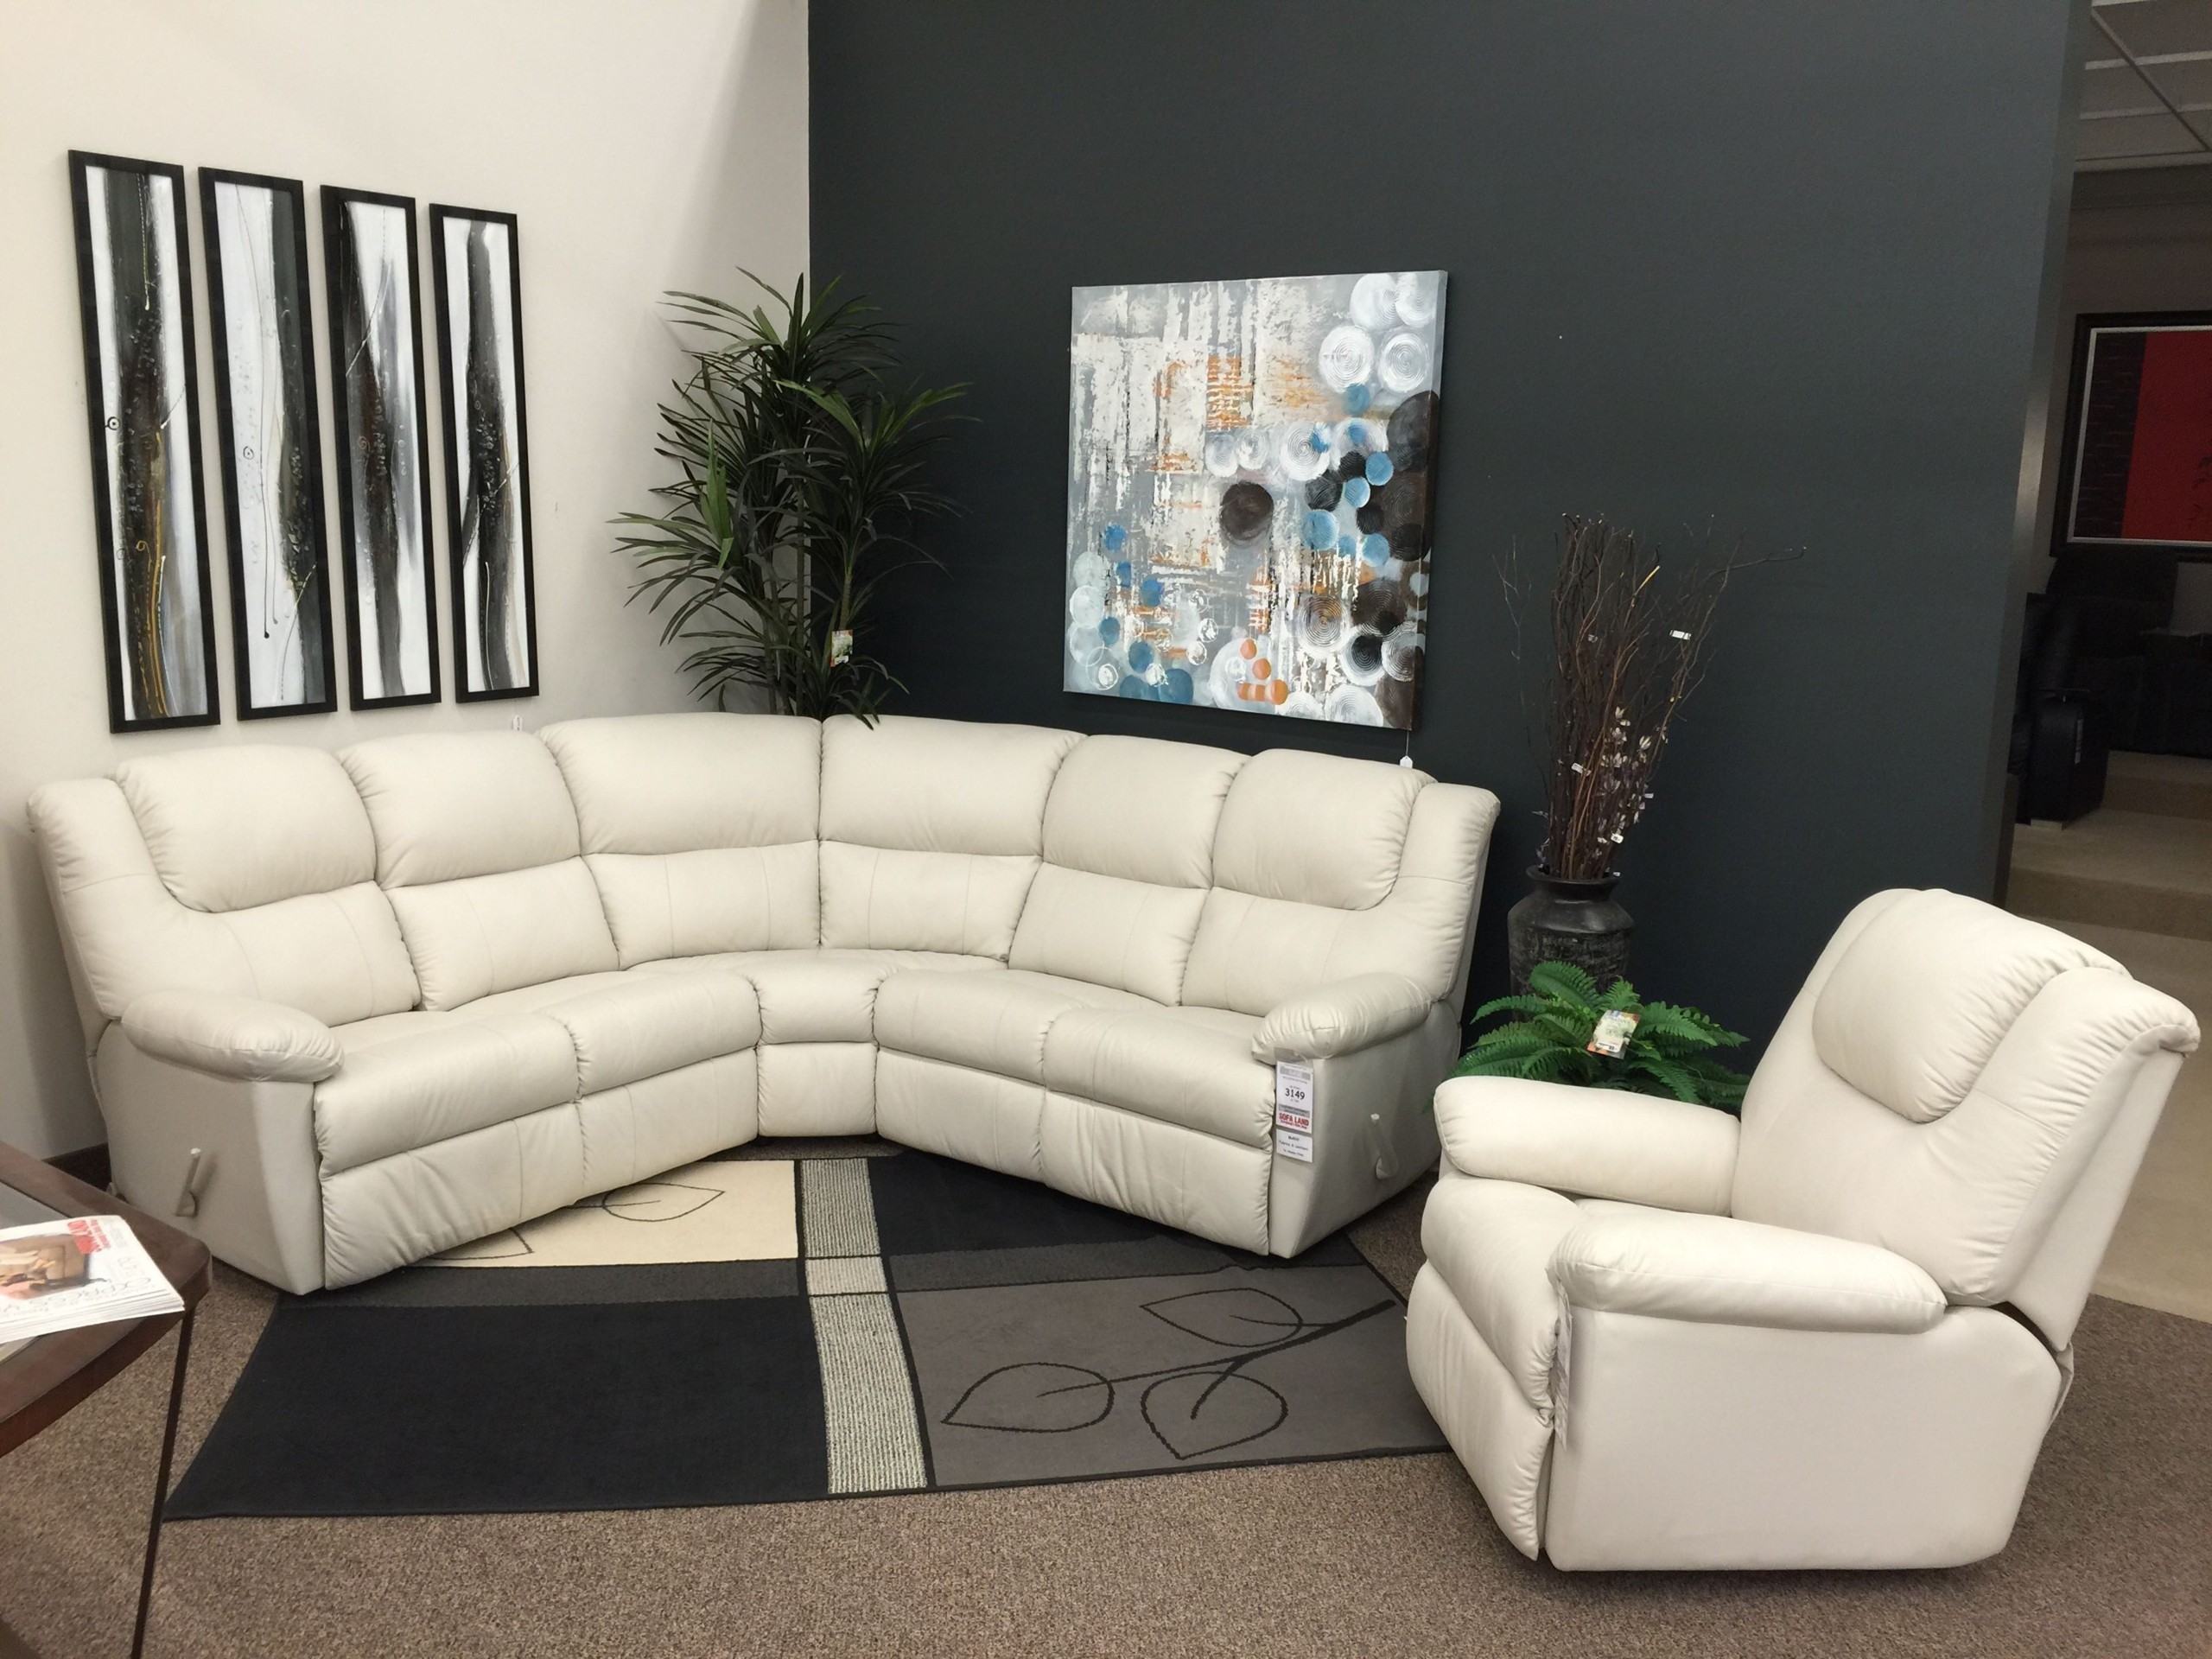 Sade is a great reclining sectional for small spaces only